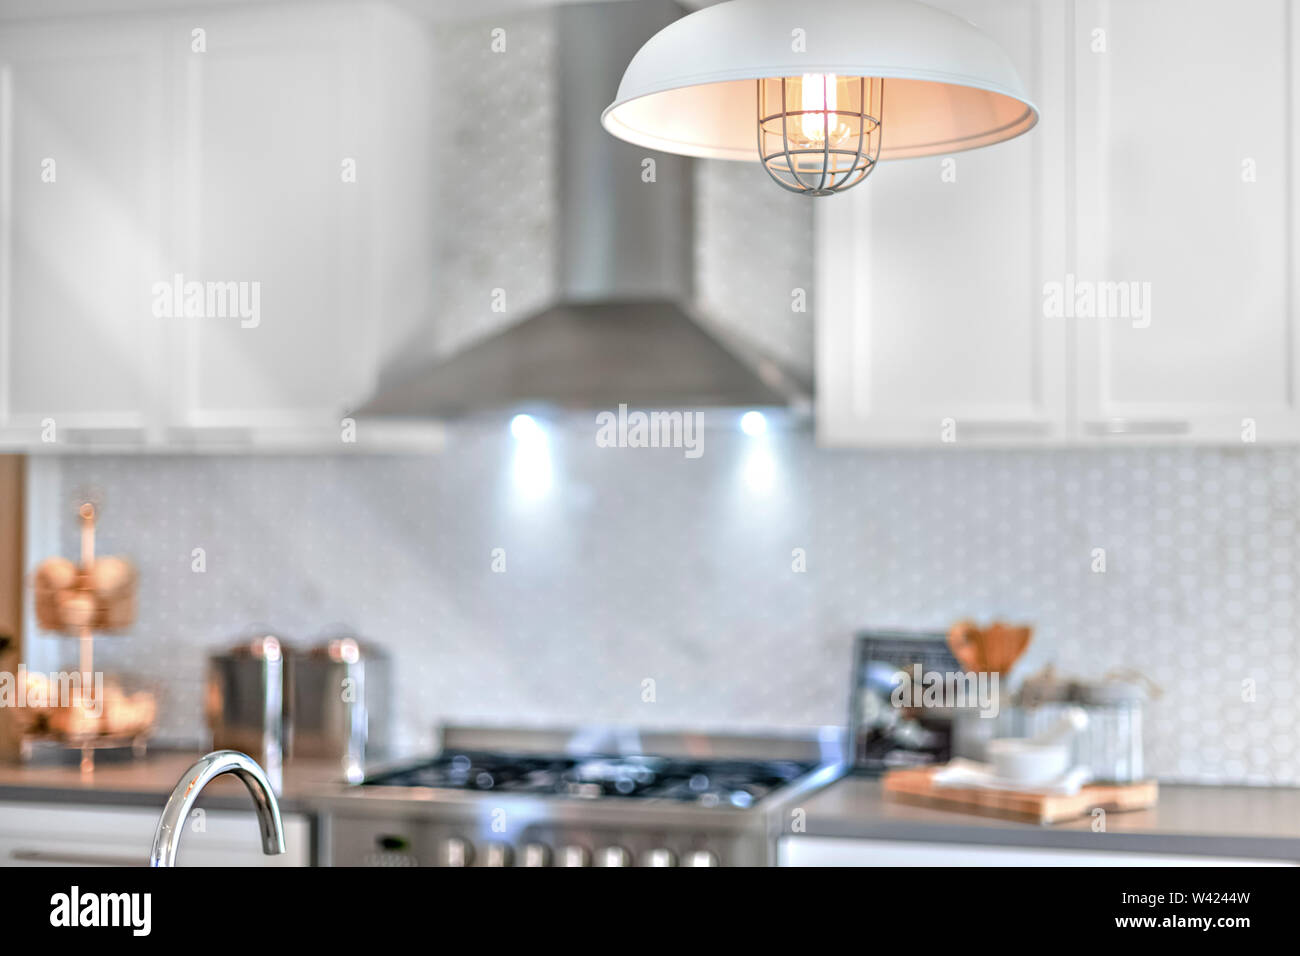 Hanging lamp illuminating with the blurred kitchen background in a modern house or hotel Stock Photo